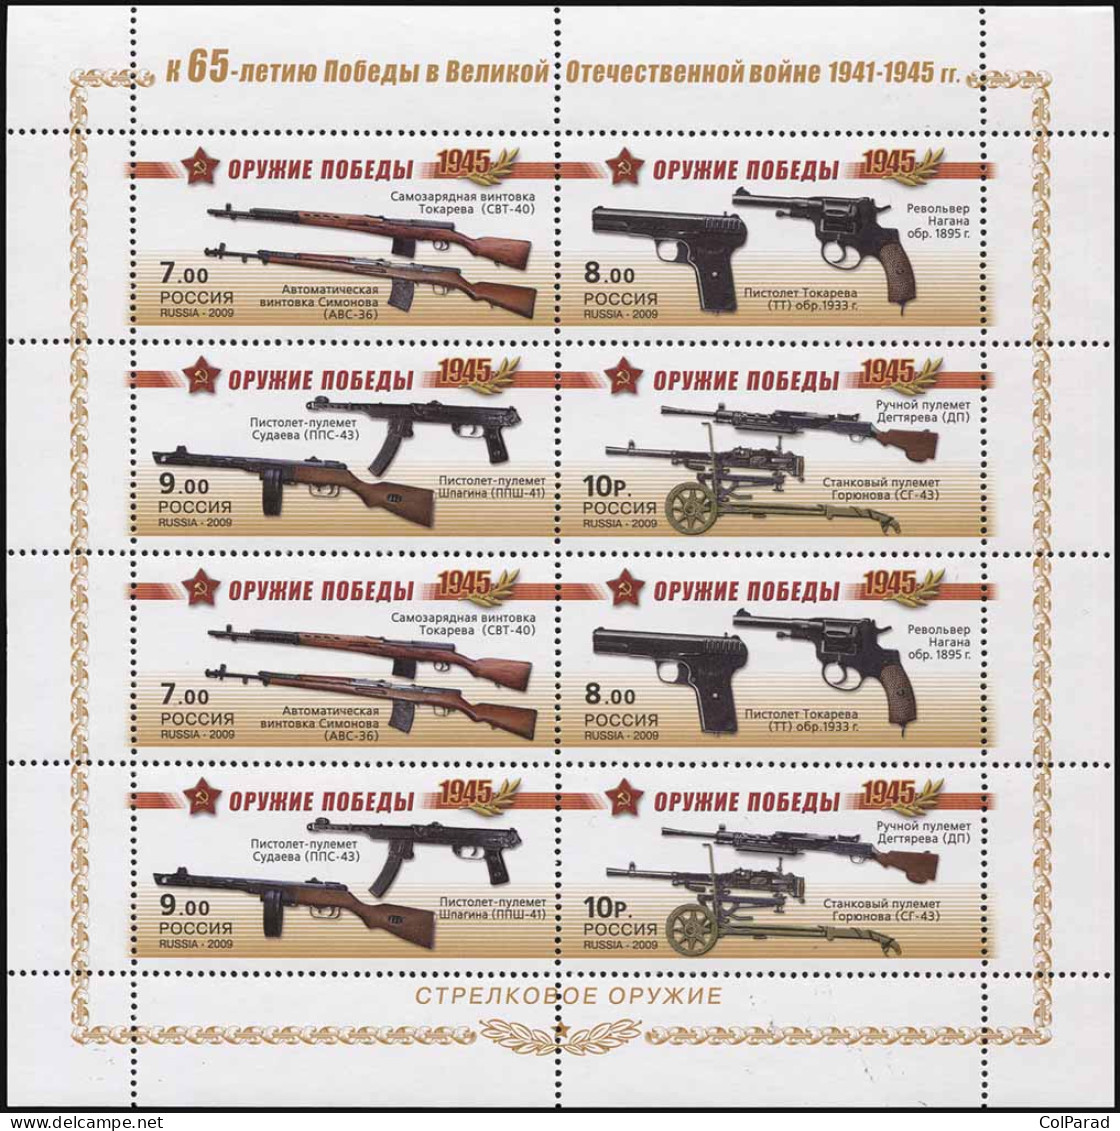 RUSSIA - 2009 - MINIATURE SHEET MNH ** - Victory Weapons. Small Arms - Nuevos